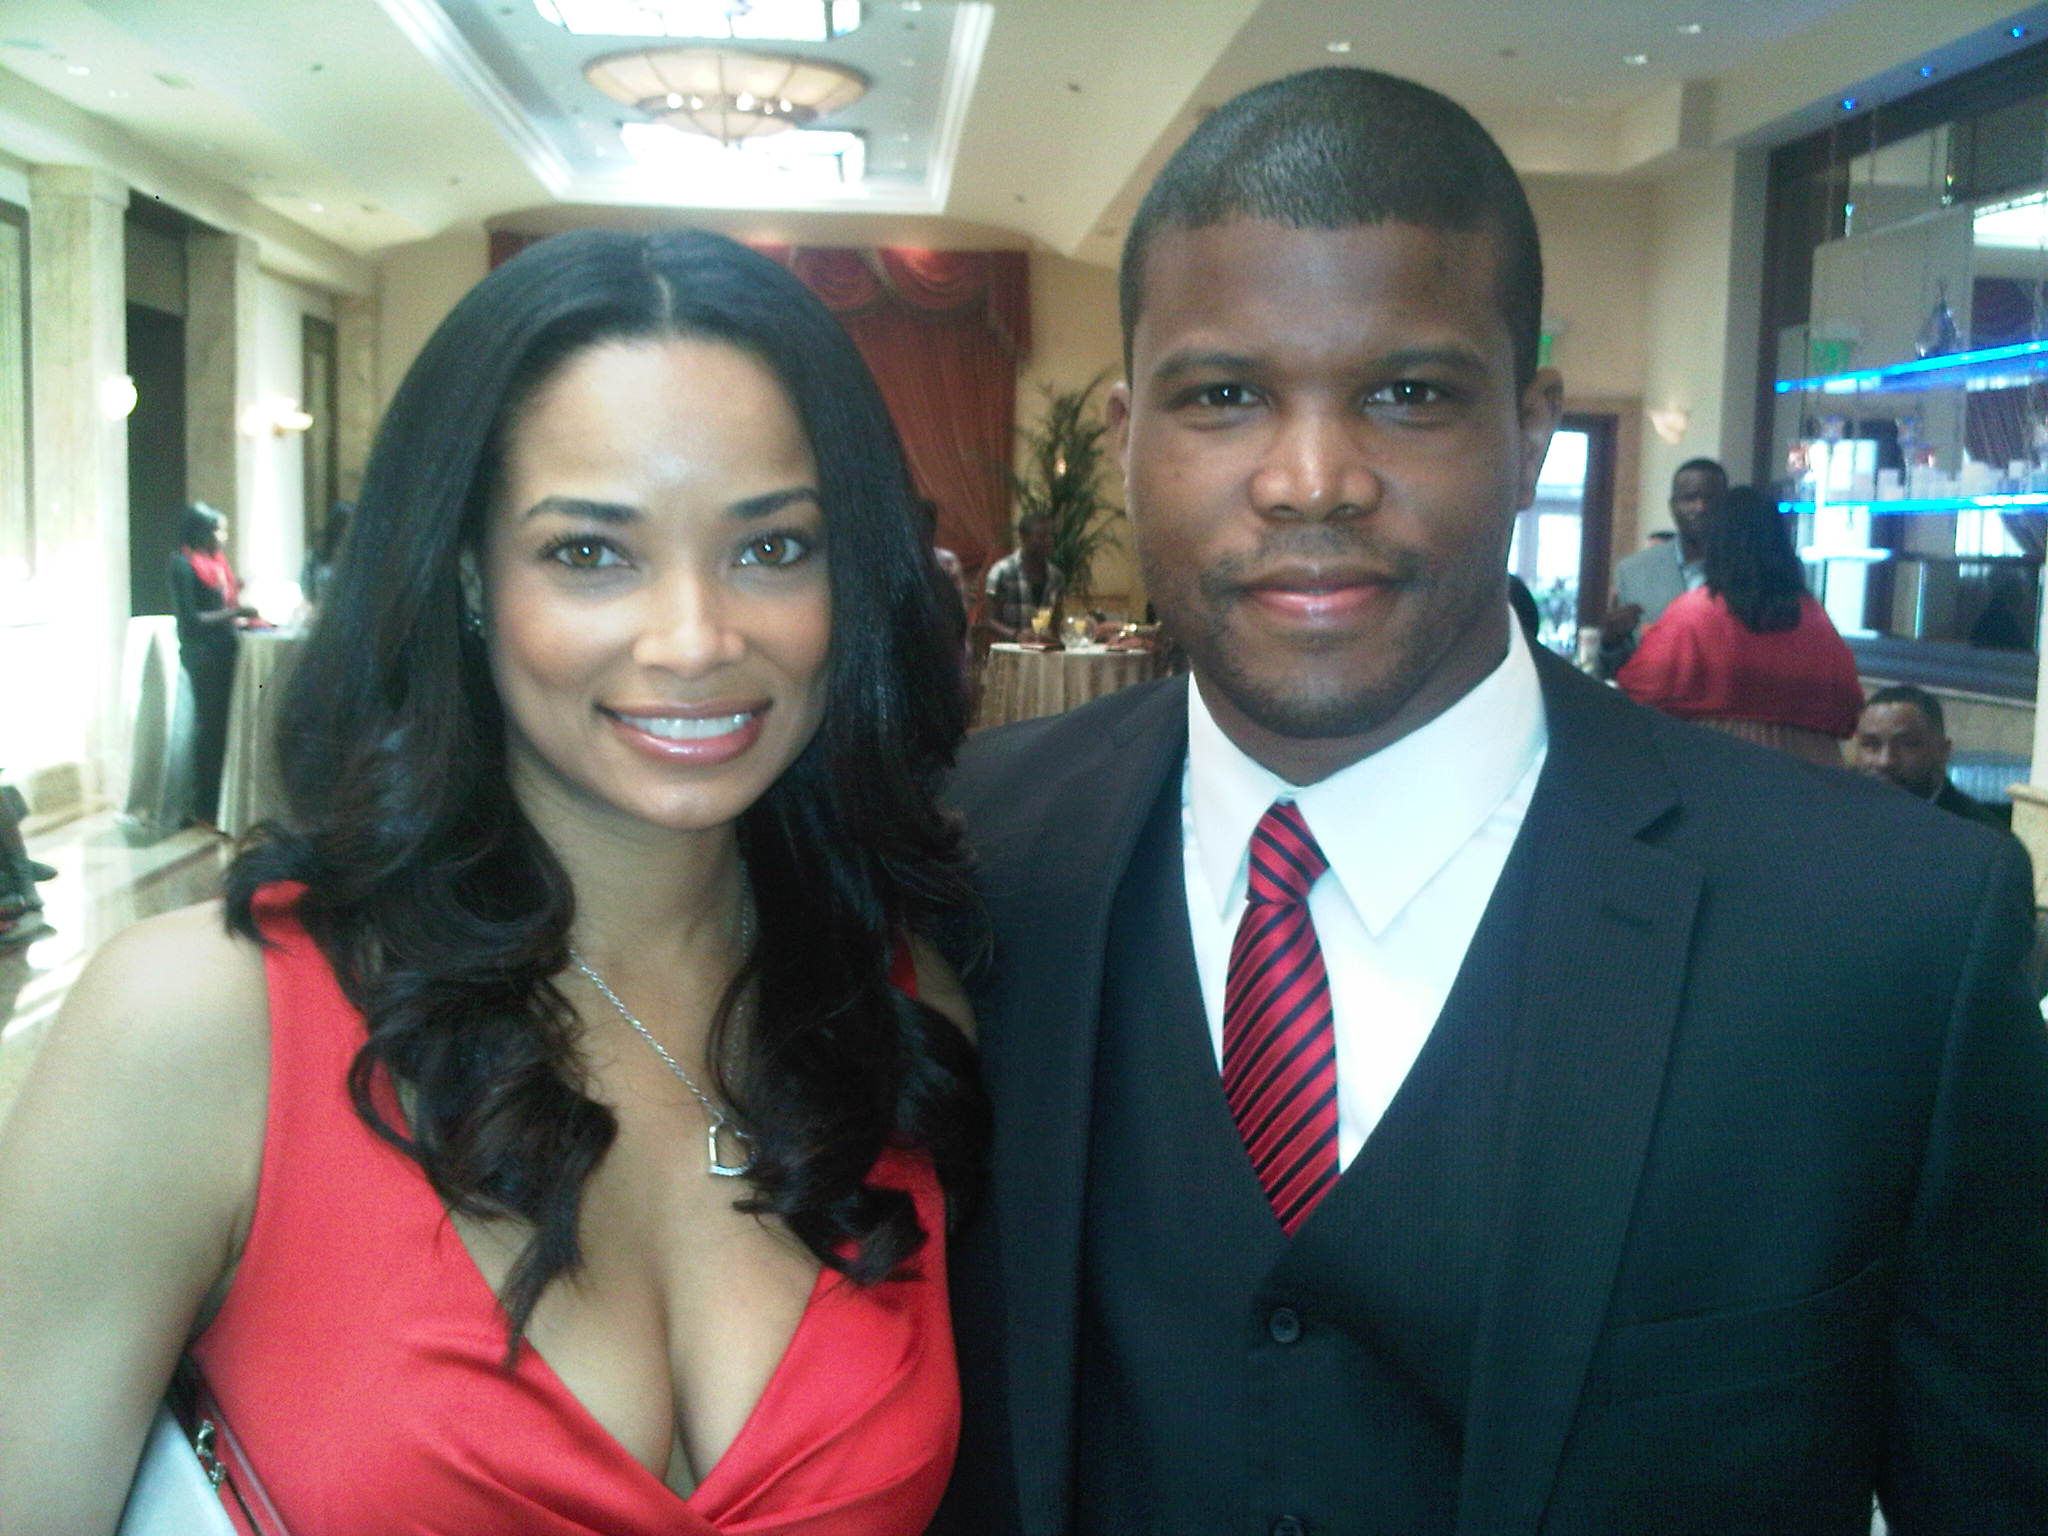 Sharif Atkins with Rochelle Aytes at the 